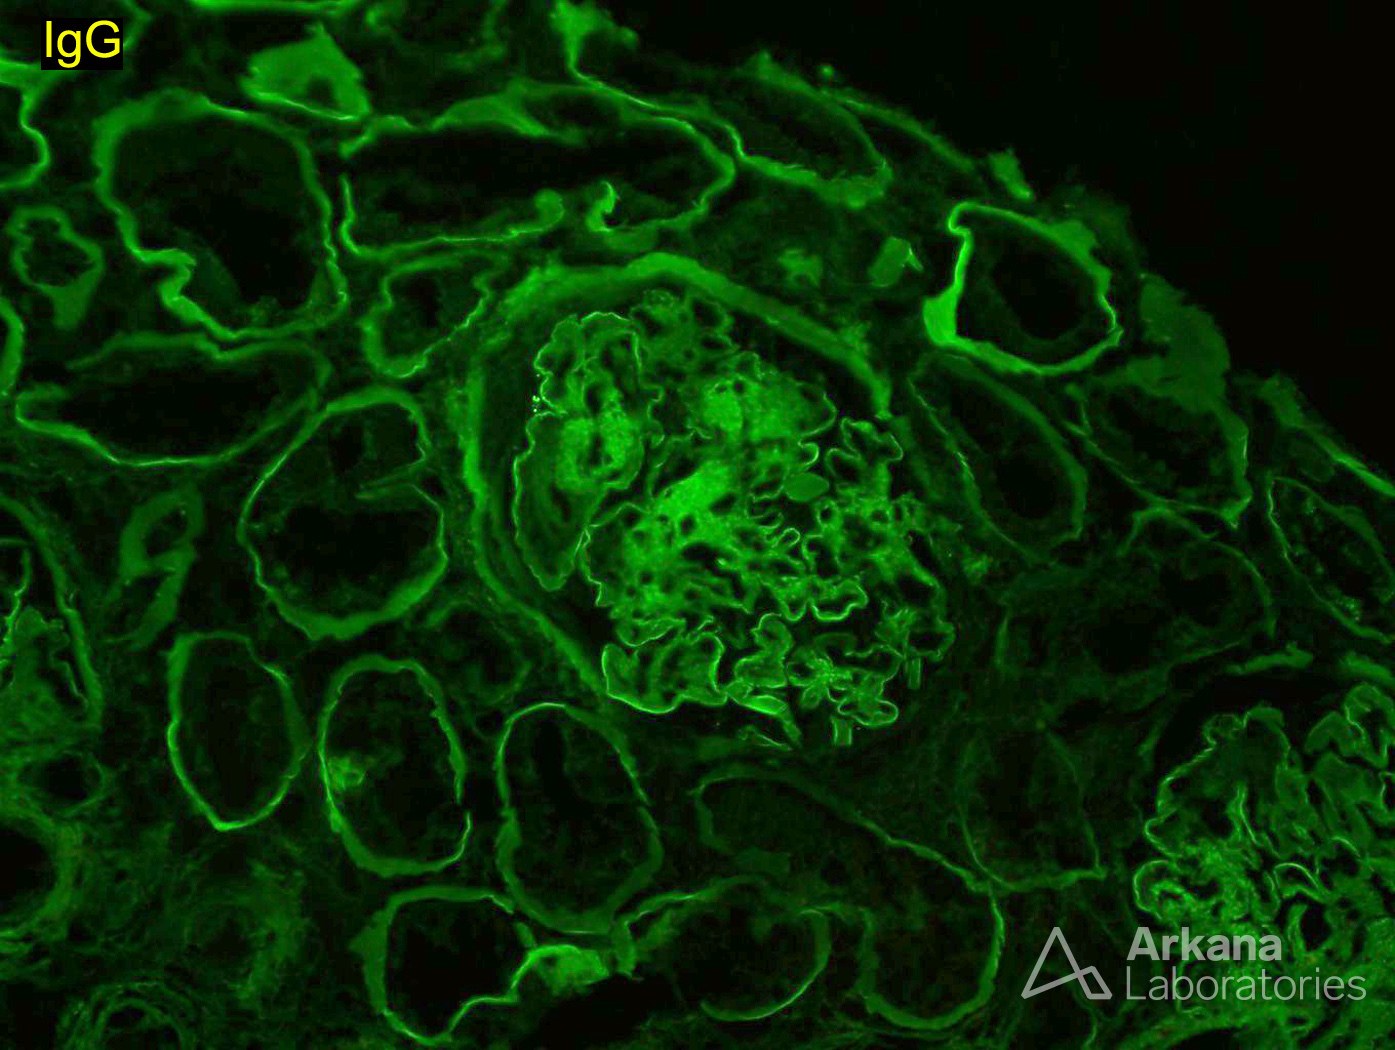 IgG Background Staining in Diabetic Nephropathy